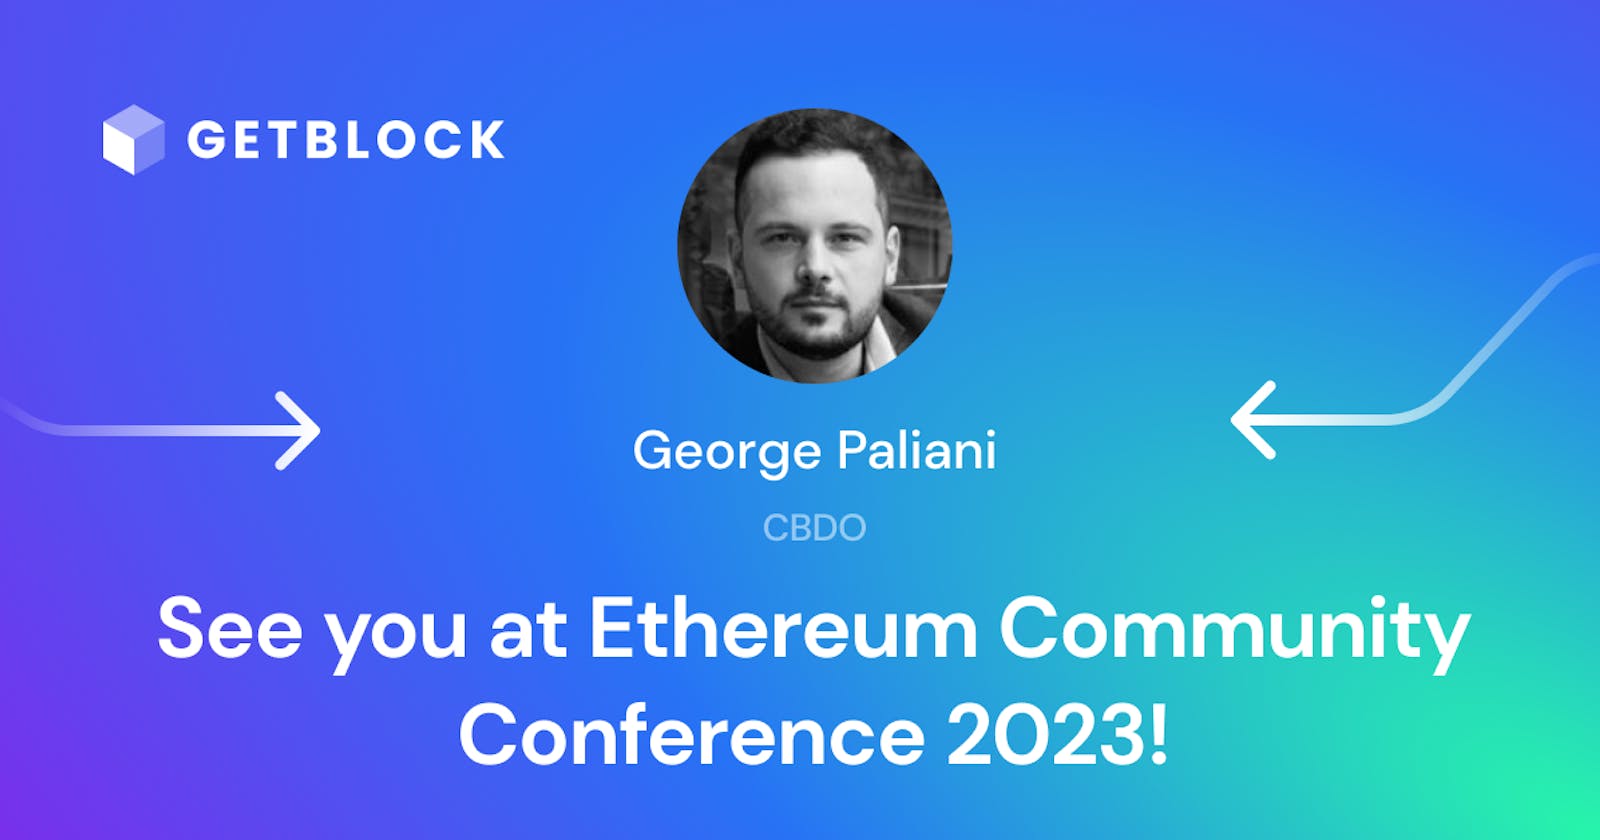 Leading RPC Node Provider GetBlock attends the Ethereum Community Conference (EthCC) 2023